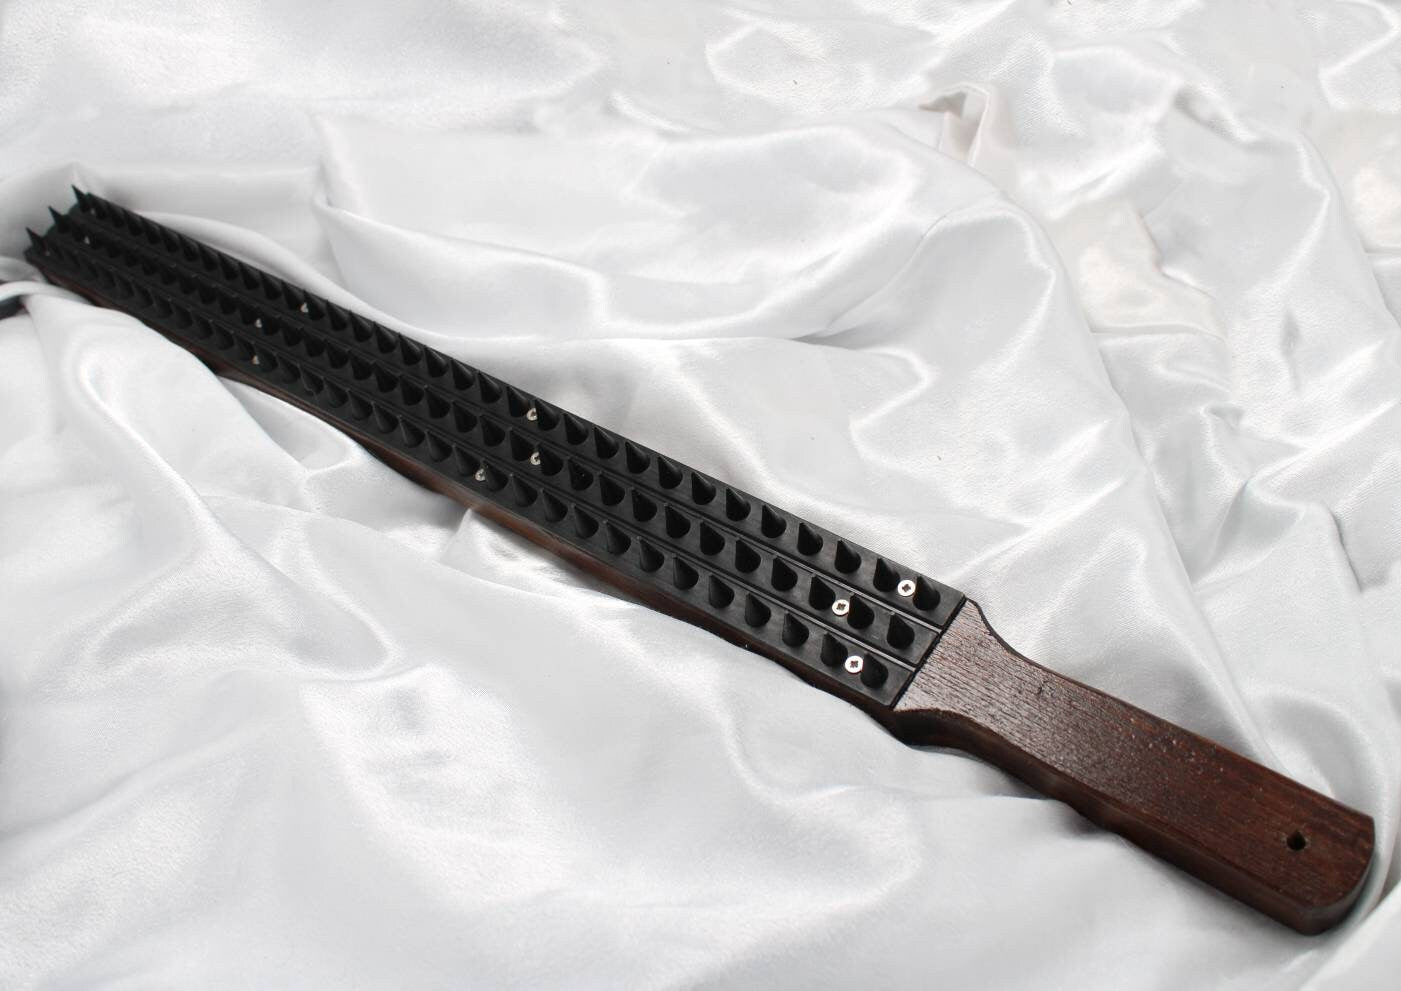 Long paddle with spikes